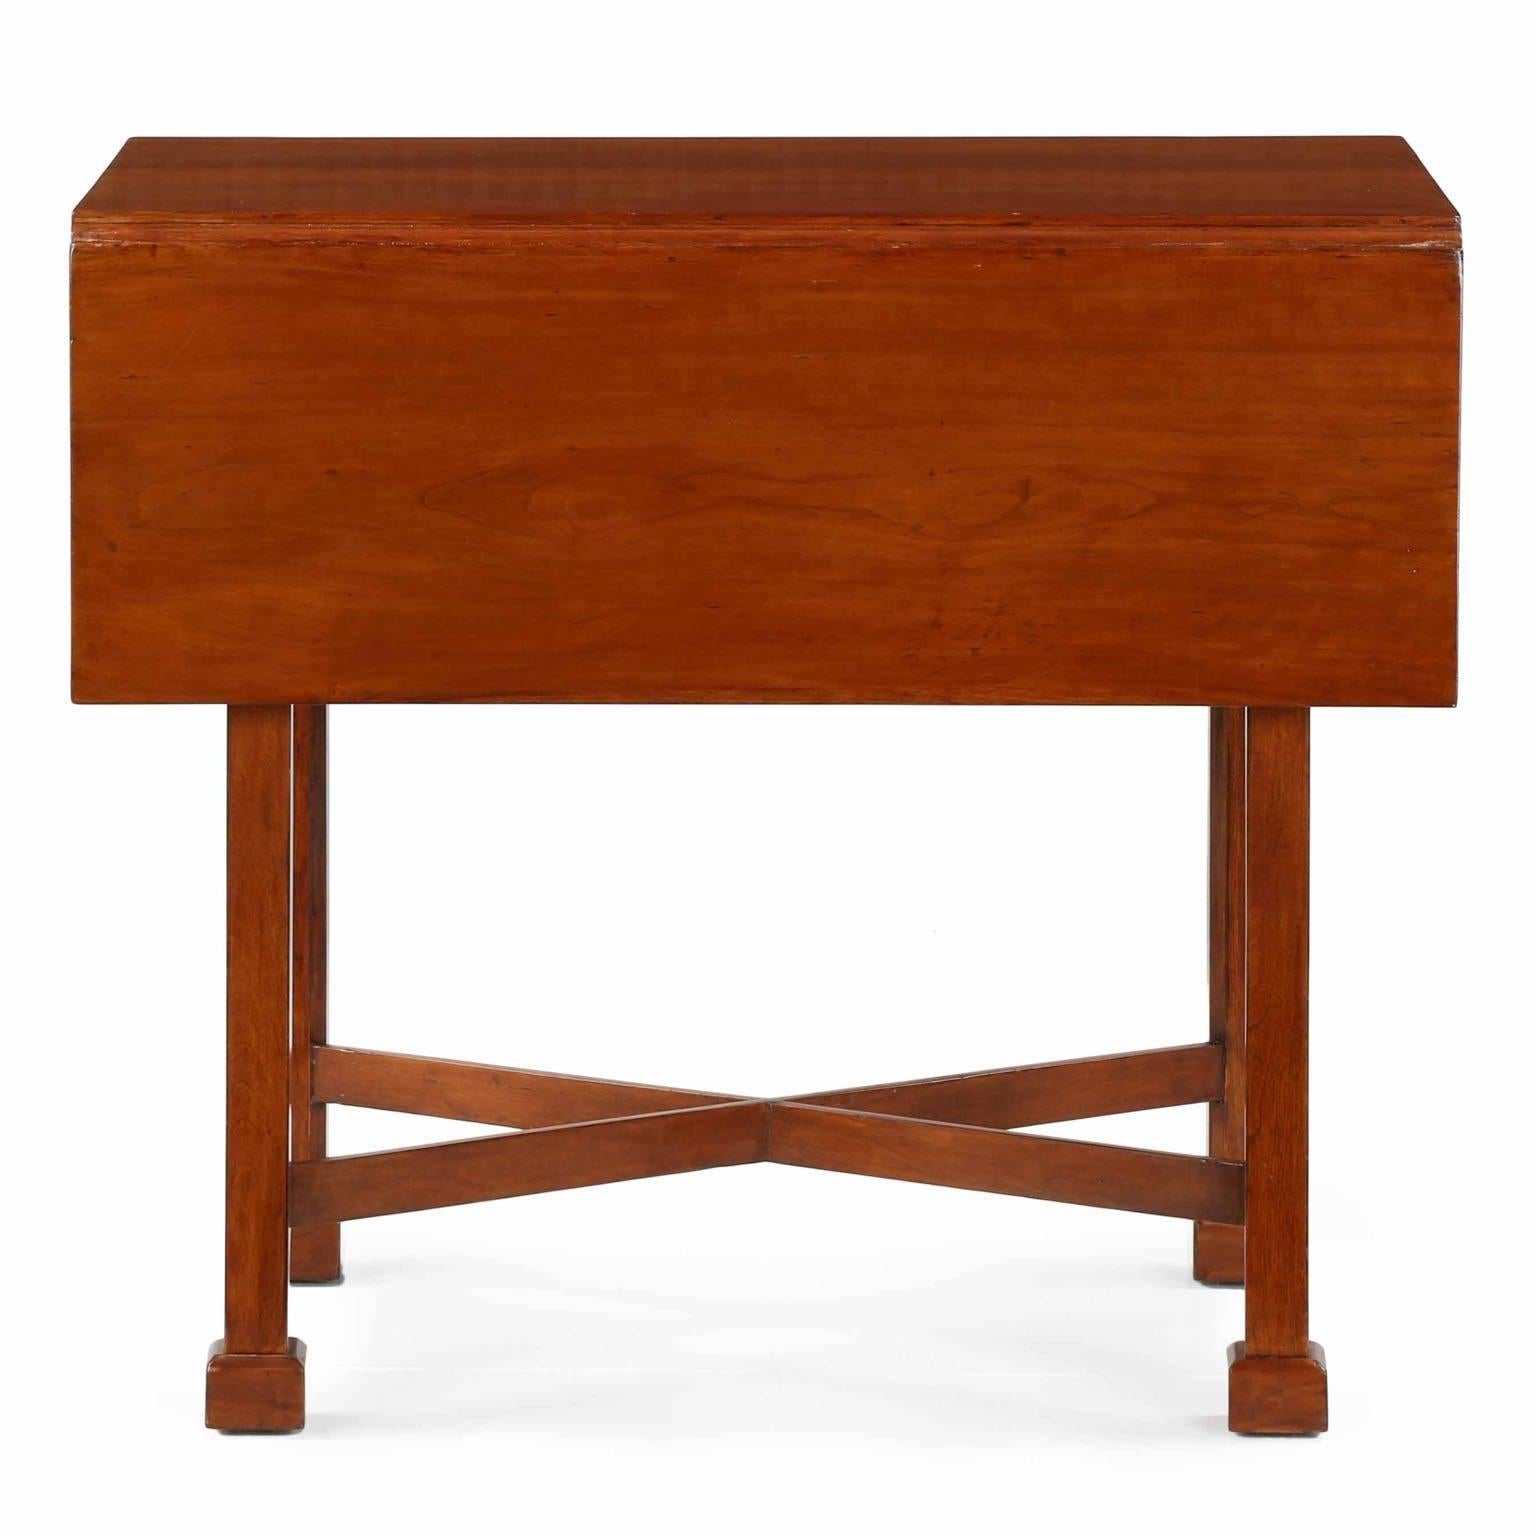 This pembroke table exhibits an austerity and simplicity that is most attractive. The top is crafted of solid plank cherry leaves and two planks of cherry for the top, each a wonderful display of ribbed grains with excellent color. The leaves lift